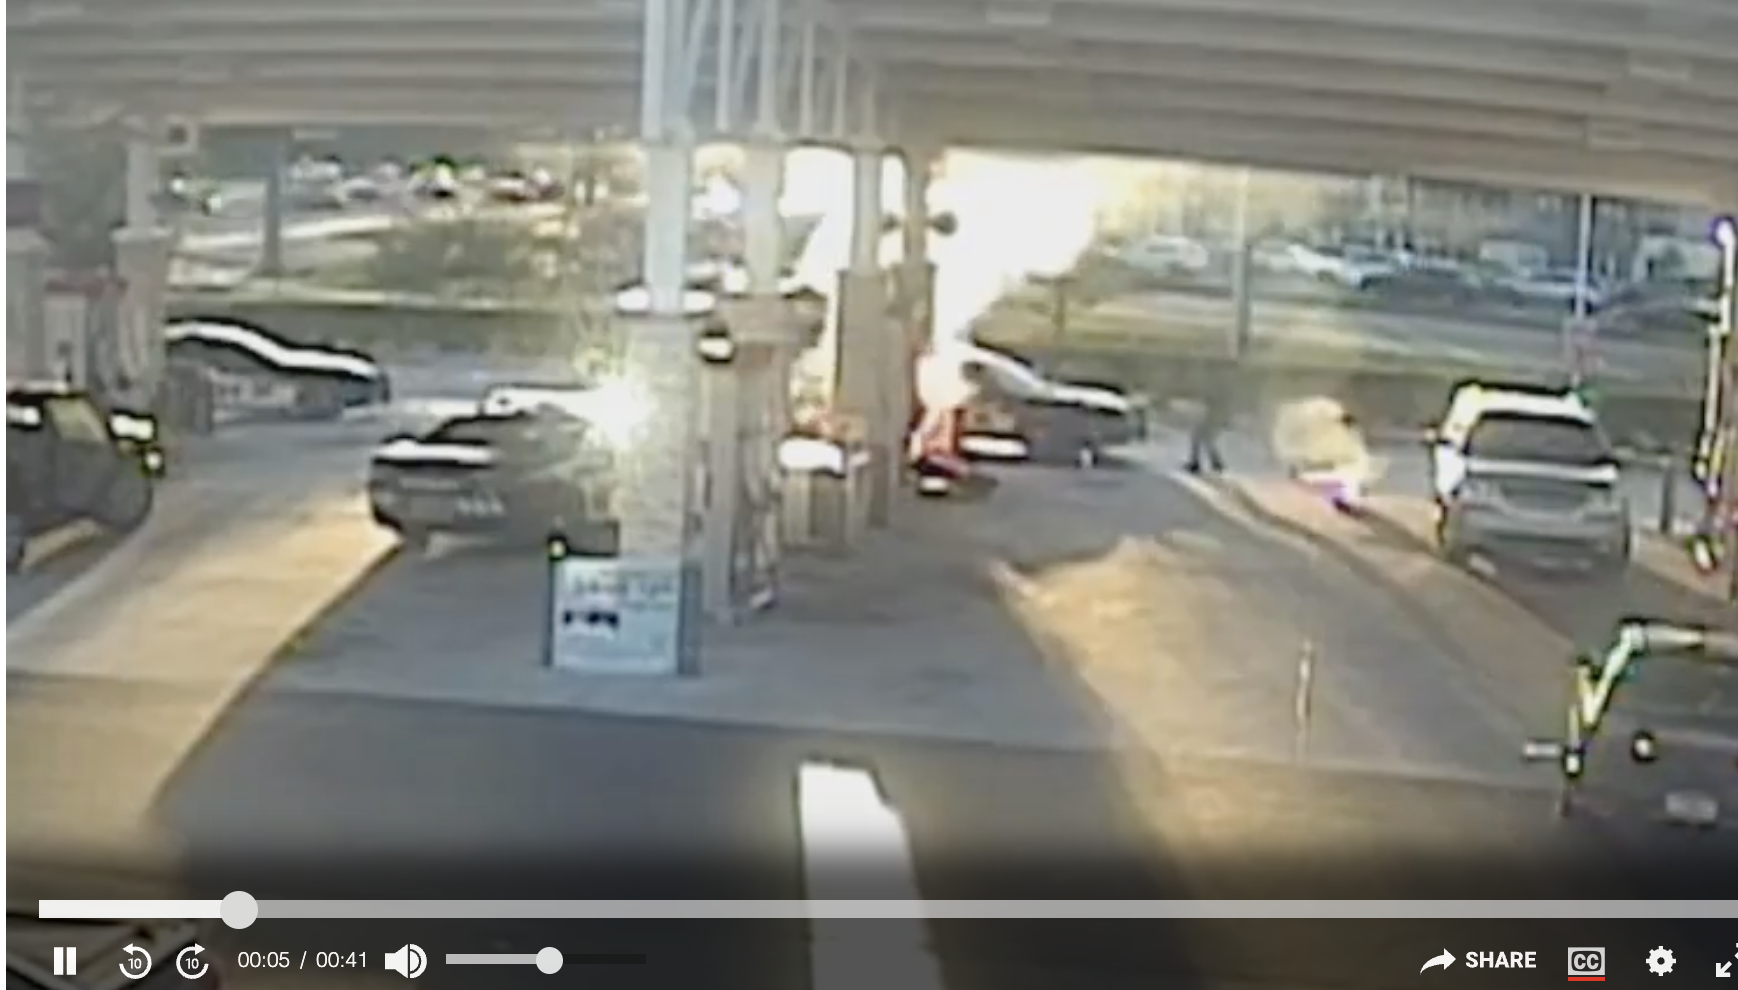 A fireball that erupted at a Florida gas station was caused by a deputy's Taser during the arrest of a motorcycle driver, state investigators found.